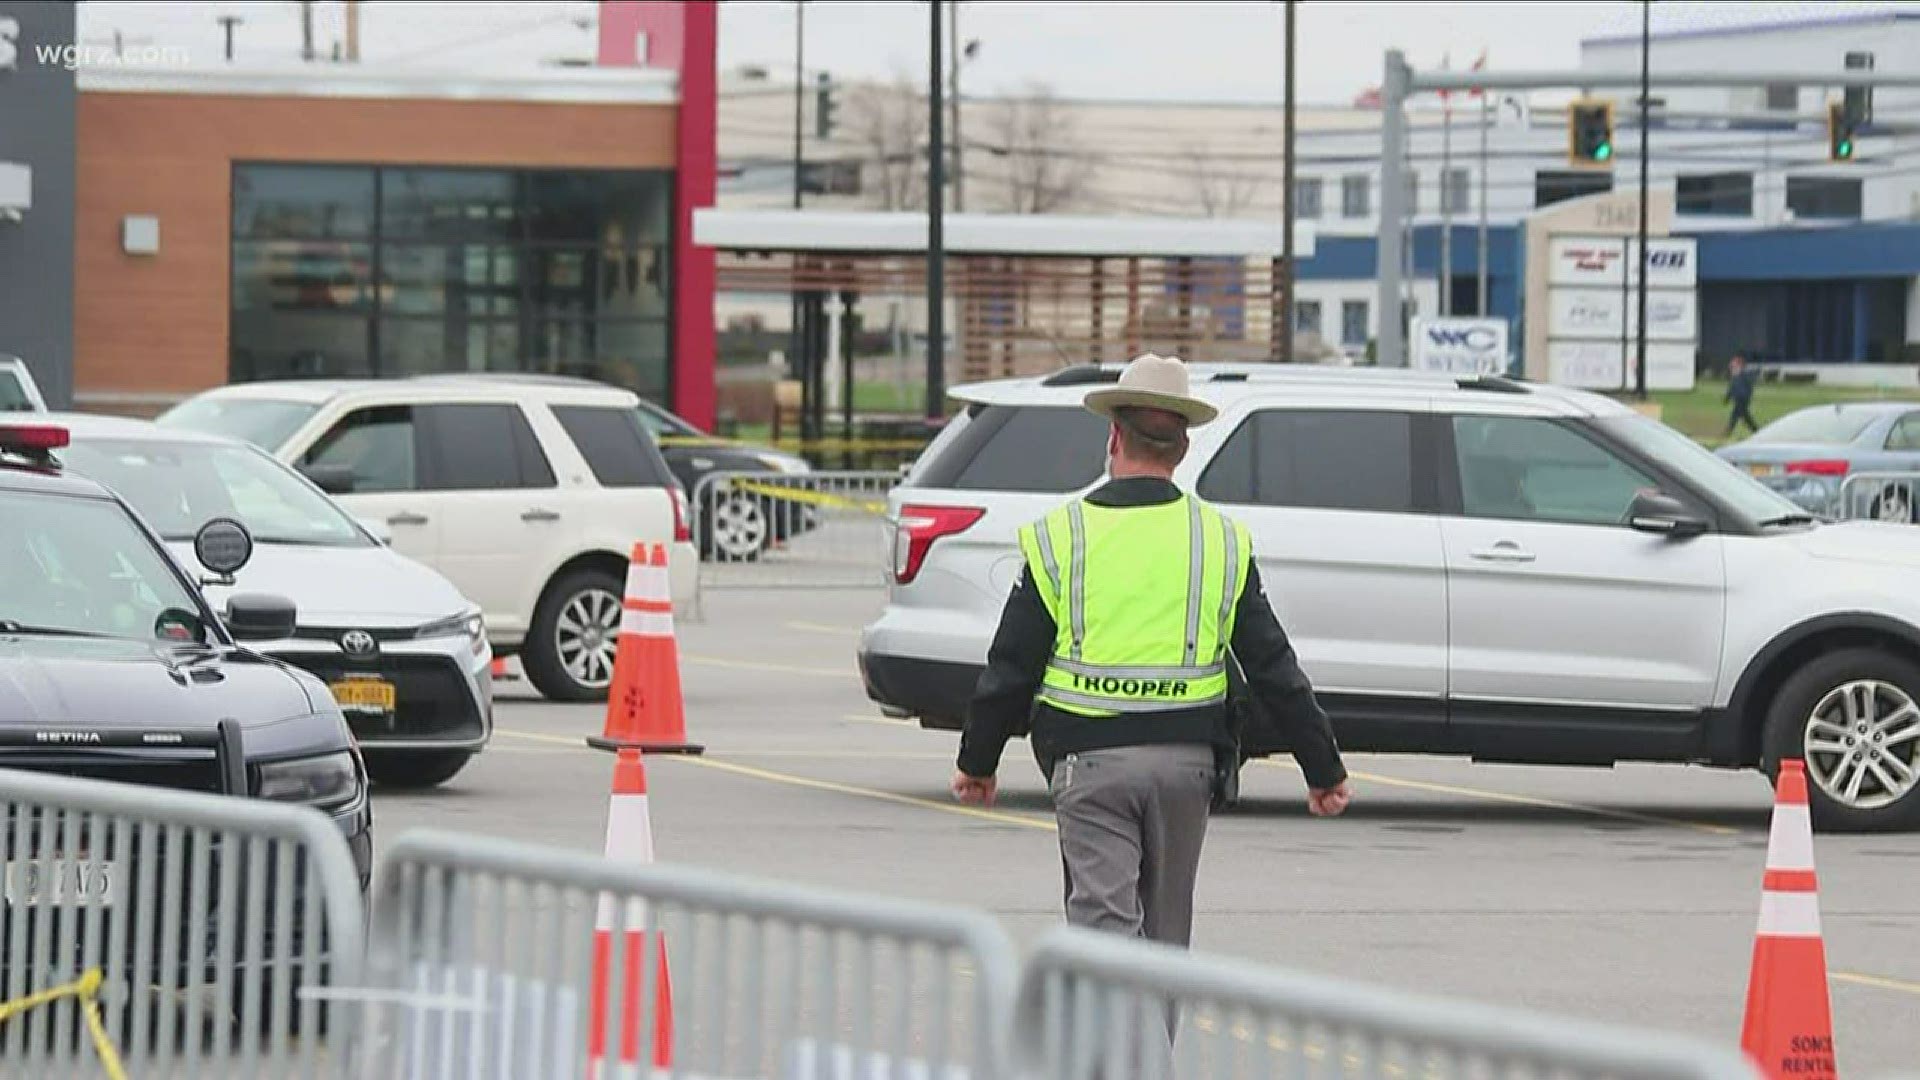 The company which is doing drive-thru testing in the Walmart parking lot in Cheektowaga tells us it can test up to 50-thousand people a day nationwide.